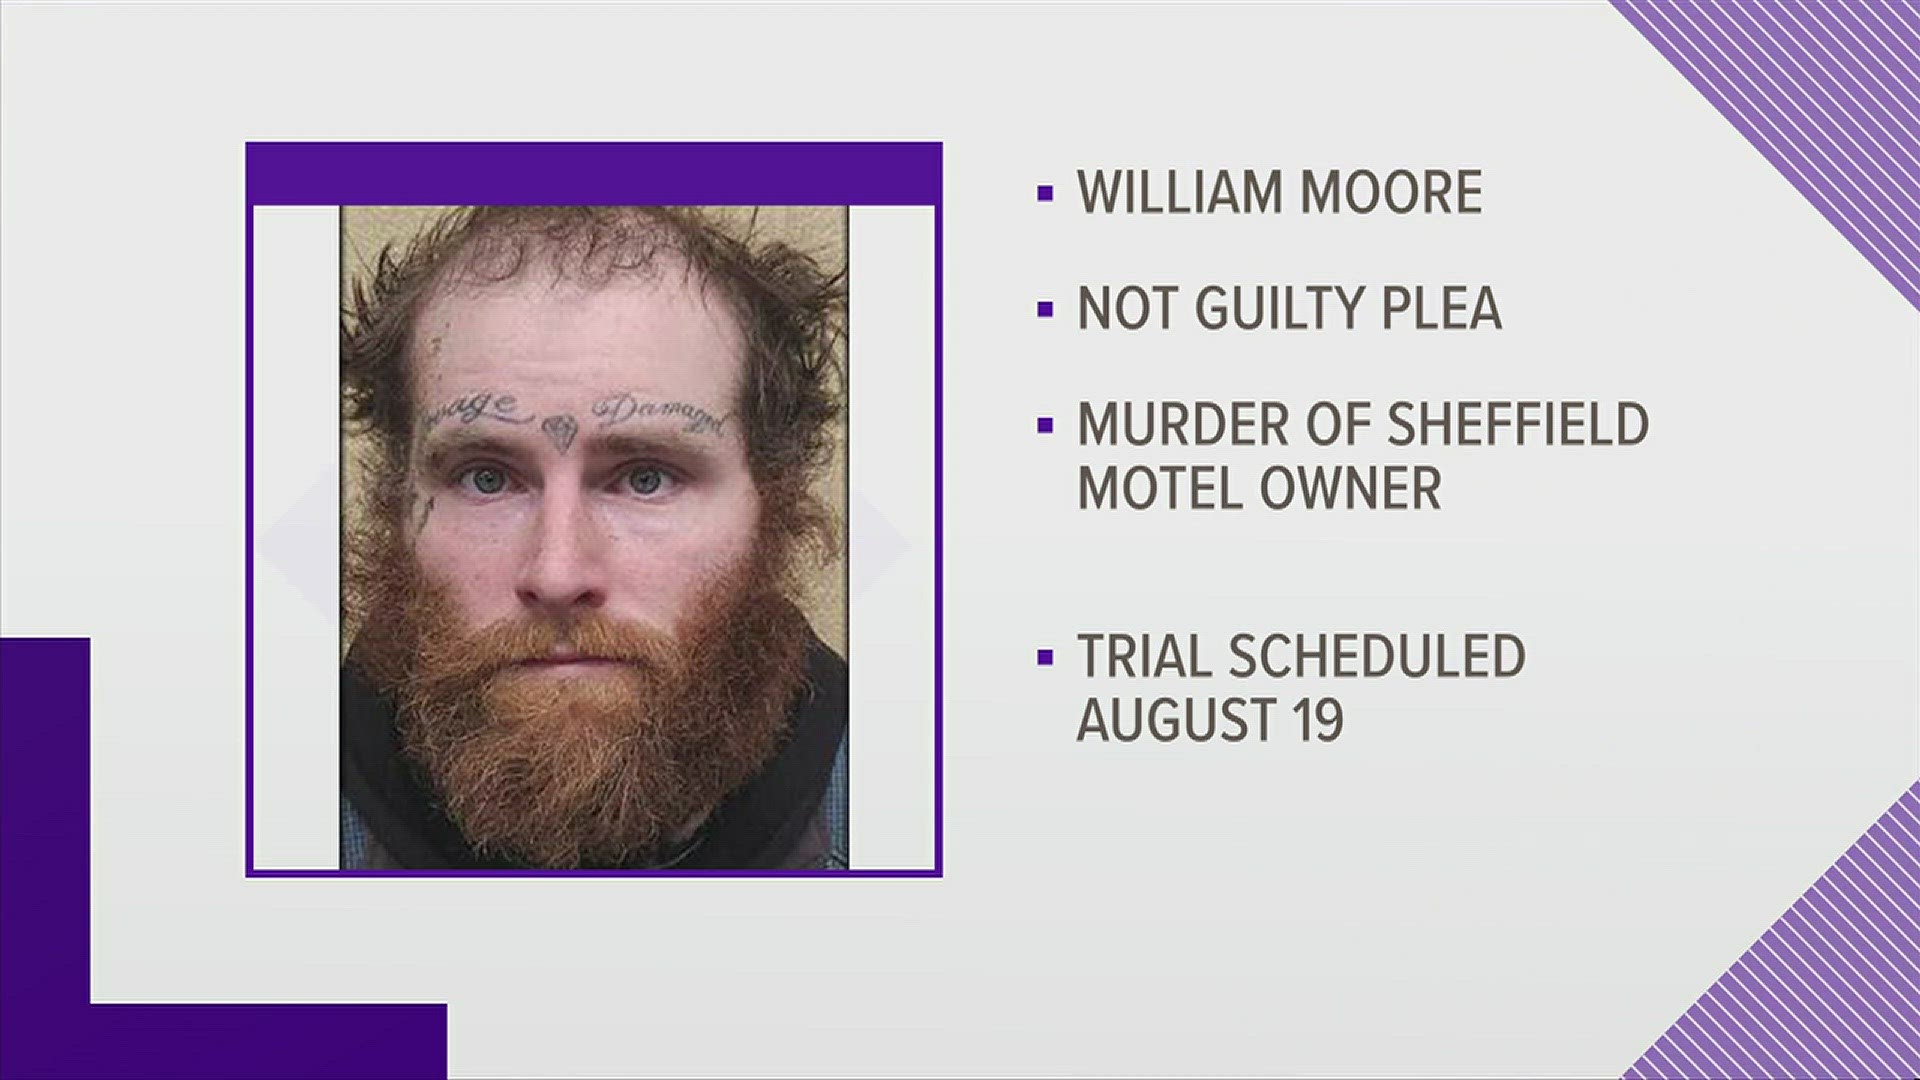 Investigators say a man they believe to be William Moore is seen on security footage fatally shooting a Sheffield motel owner in February.